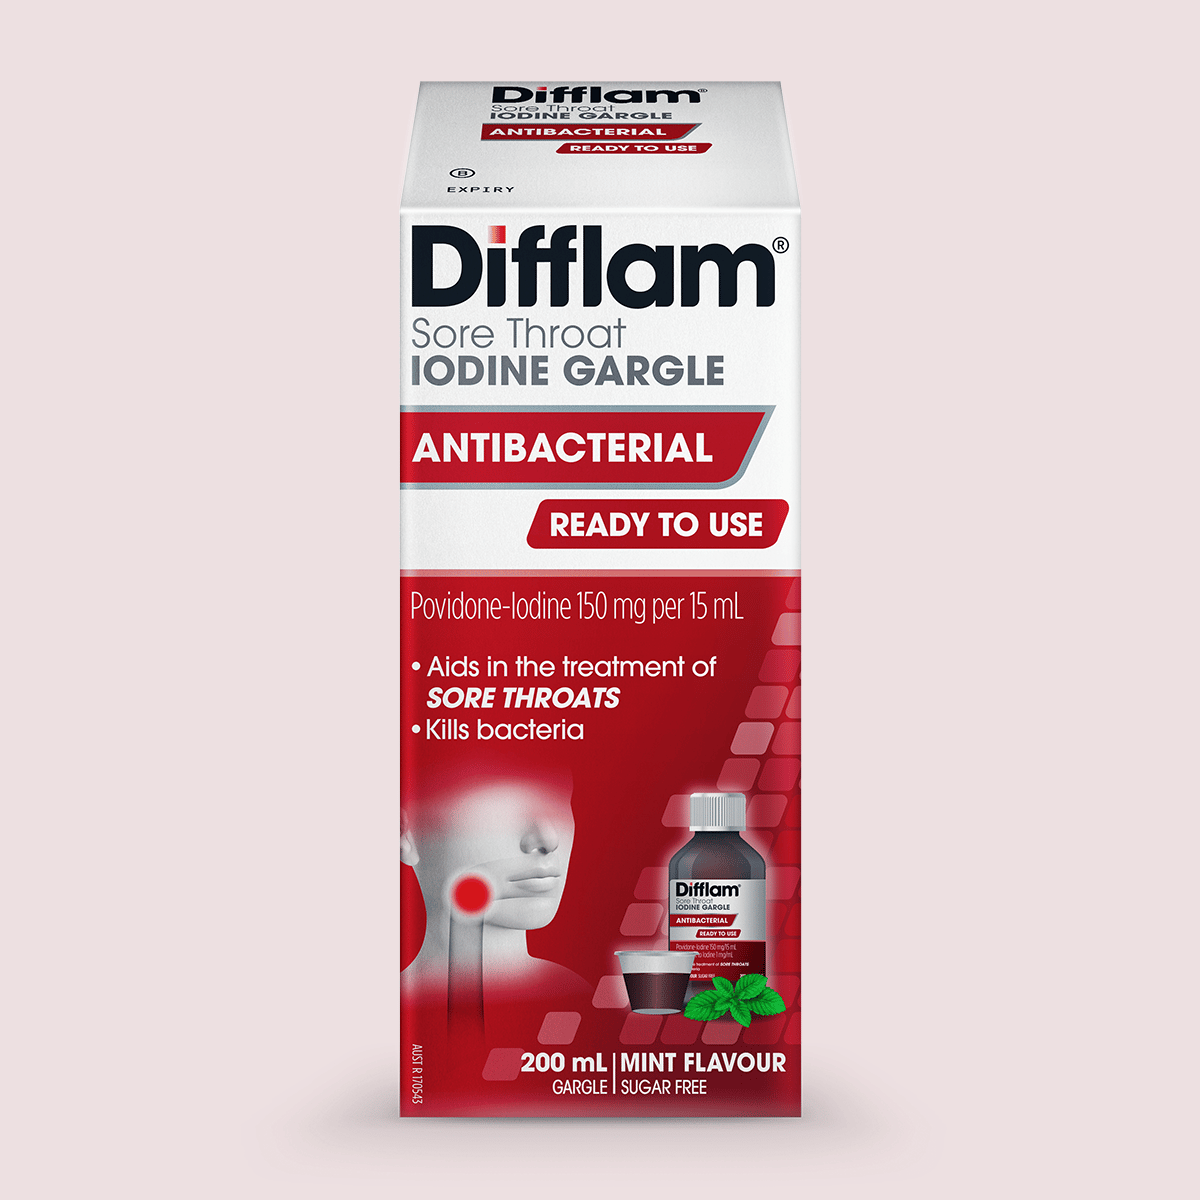 Difflam Gargles are ideal for immediate antibacterial defence when you feel a a sore throat coming on, available in convenient pack sizes and ready-to-use formulas.